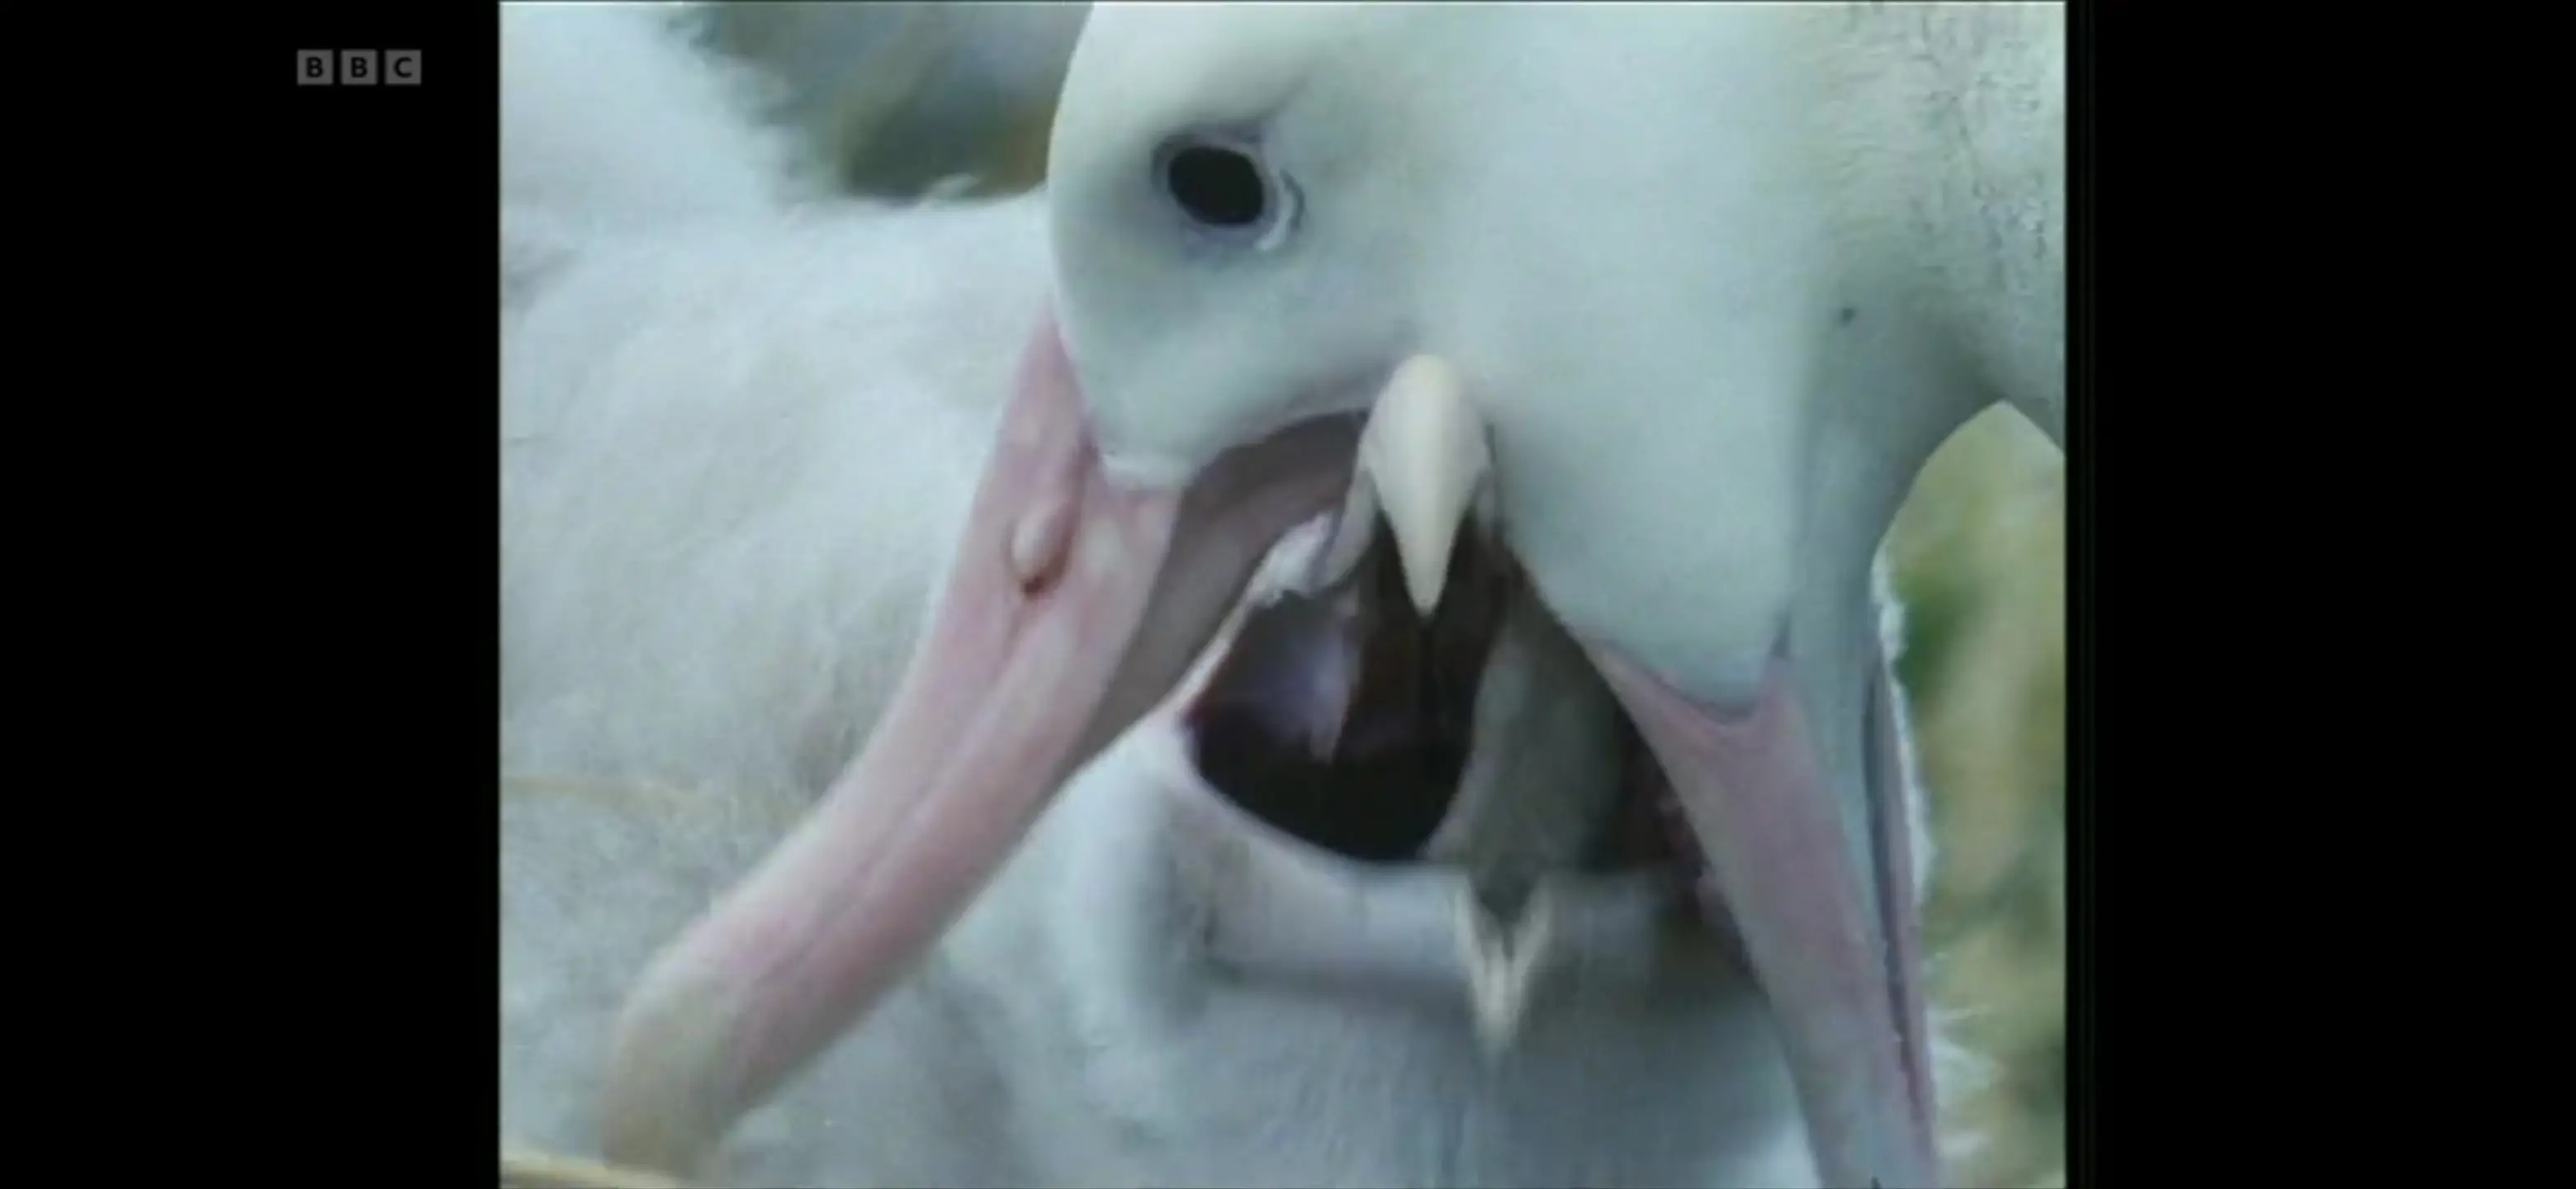 Wandering albatross (Diomedea exulans) as shown in Life in the Freezer - The Bountiful Sea